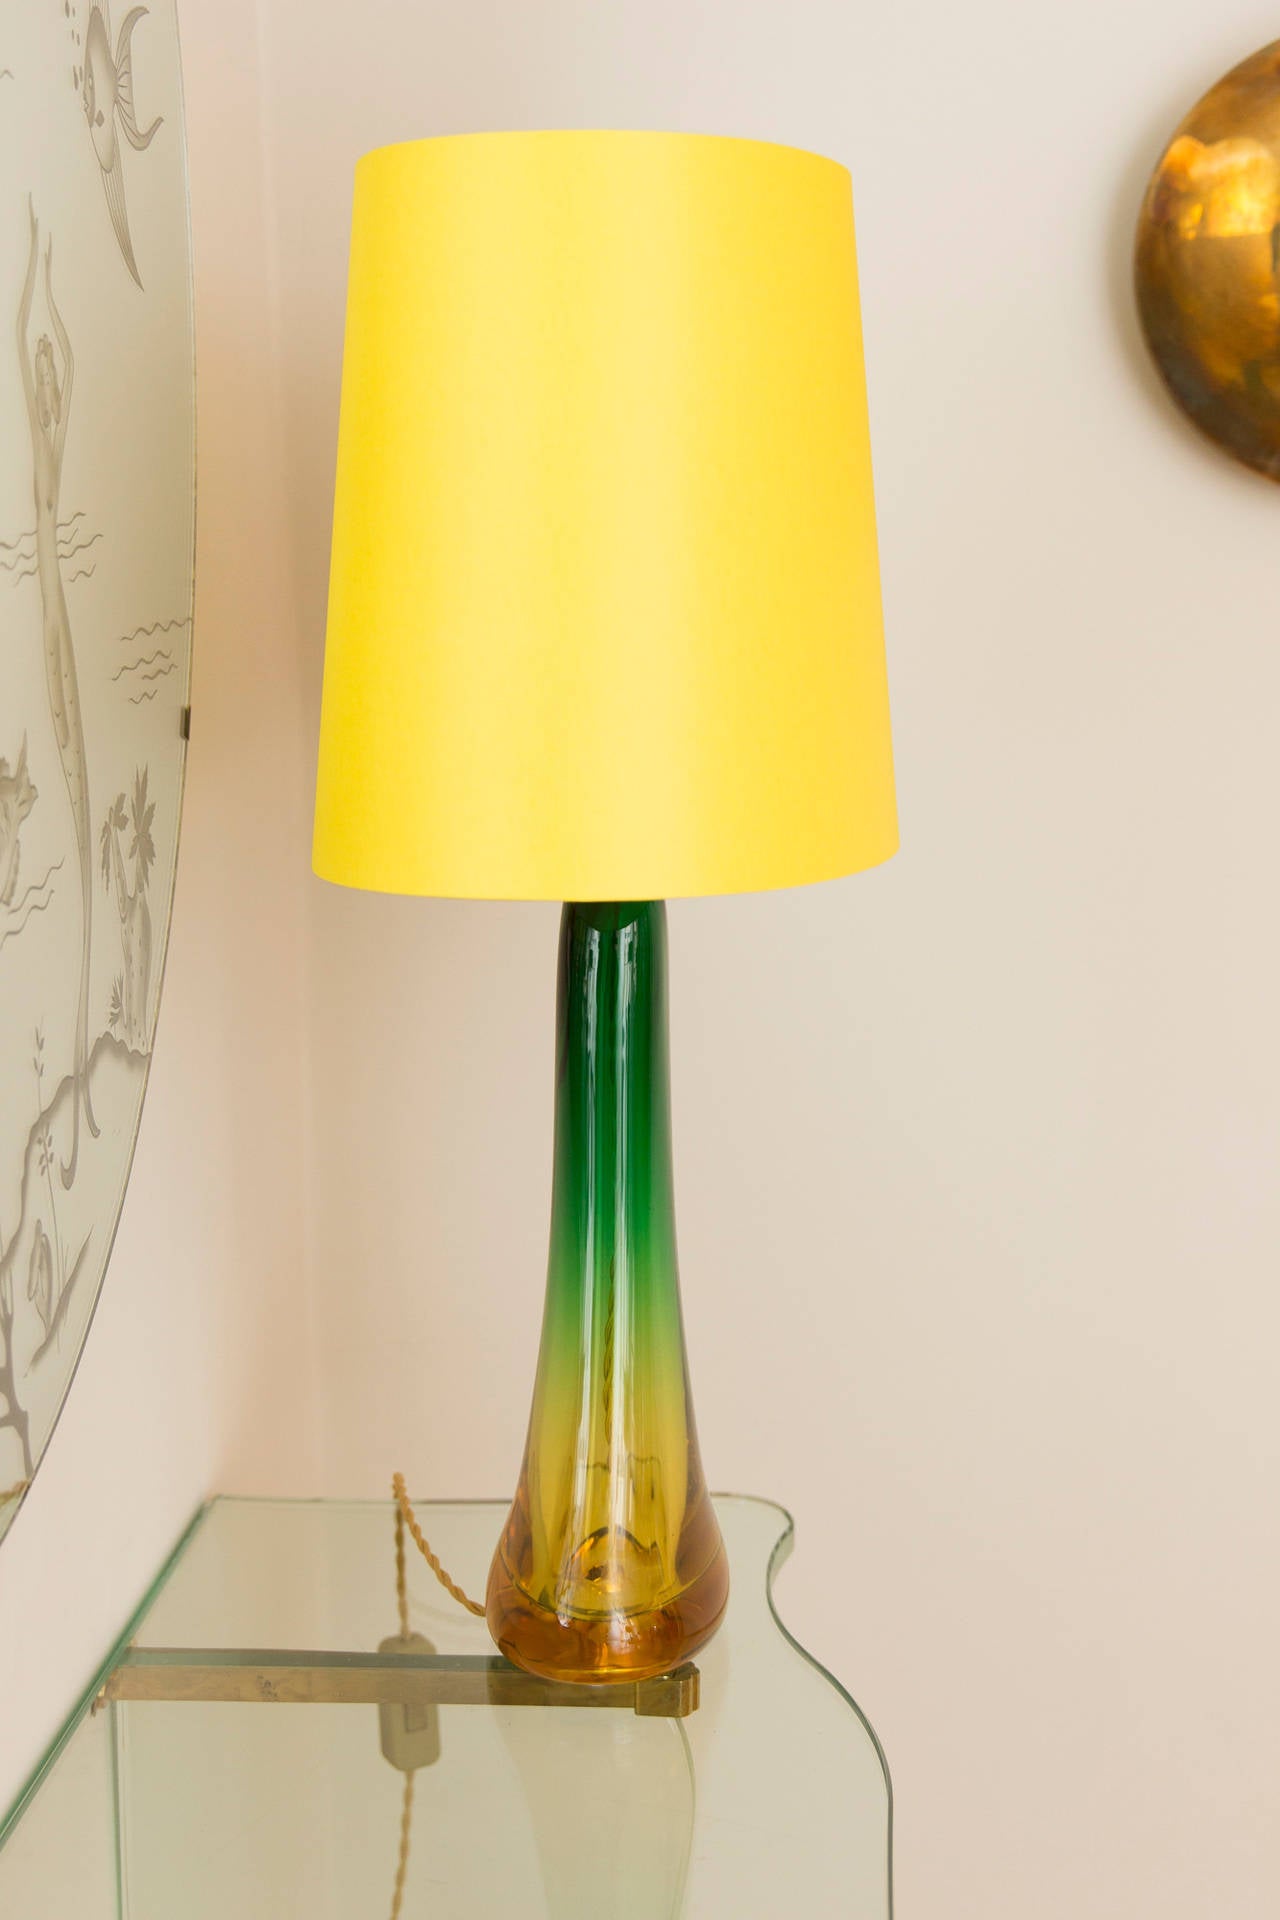 Table lamp by Vetri, Cenedese Murano Italy, circa 1950, blown glass with two different colors green and yellow, new yellow cotton shade, rewired, manufacture label Vetri.
Height 65 cm including shade, diameter shade 38 cm/30 cm.
Base height 45